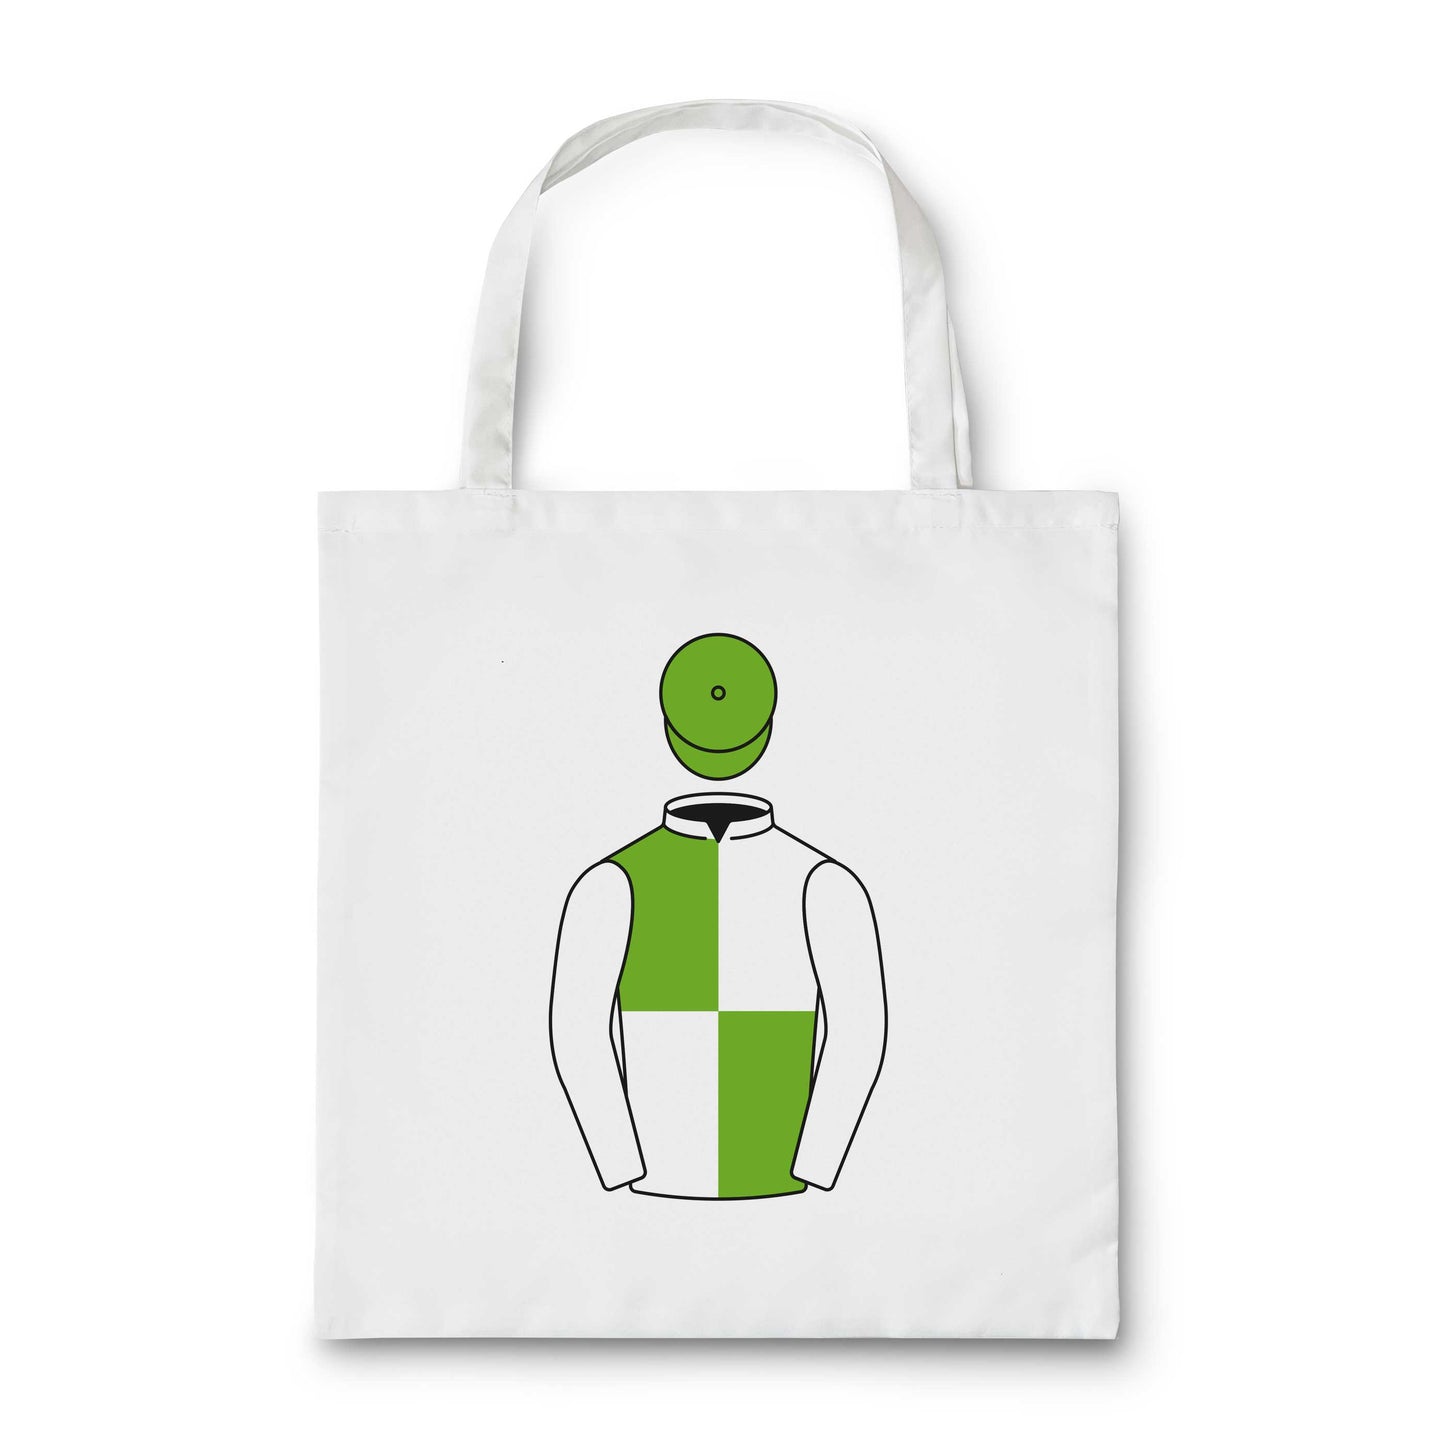 ISL Recruitment Tote Bag - Tote Bag - Hacked Up